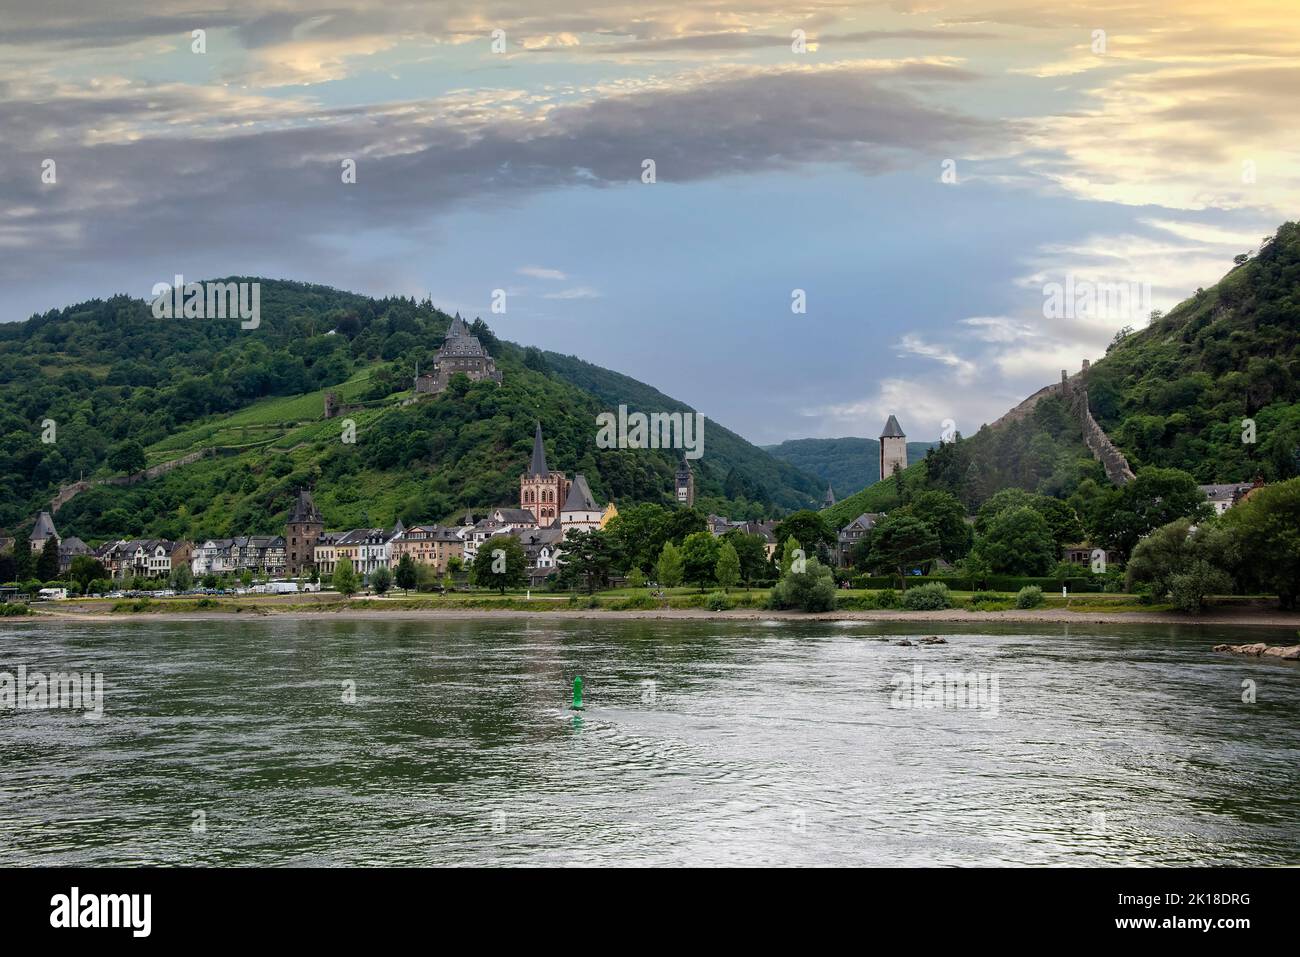 Bacharach, Germany - July 16, 2017:  Bacharach is a small town in the Mainz-Bingen district in Rhineland-Palatinate, Germany. Stock Photo